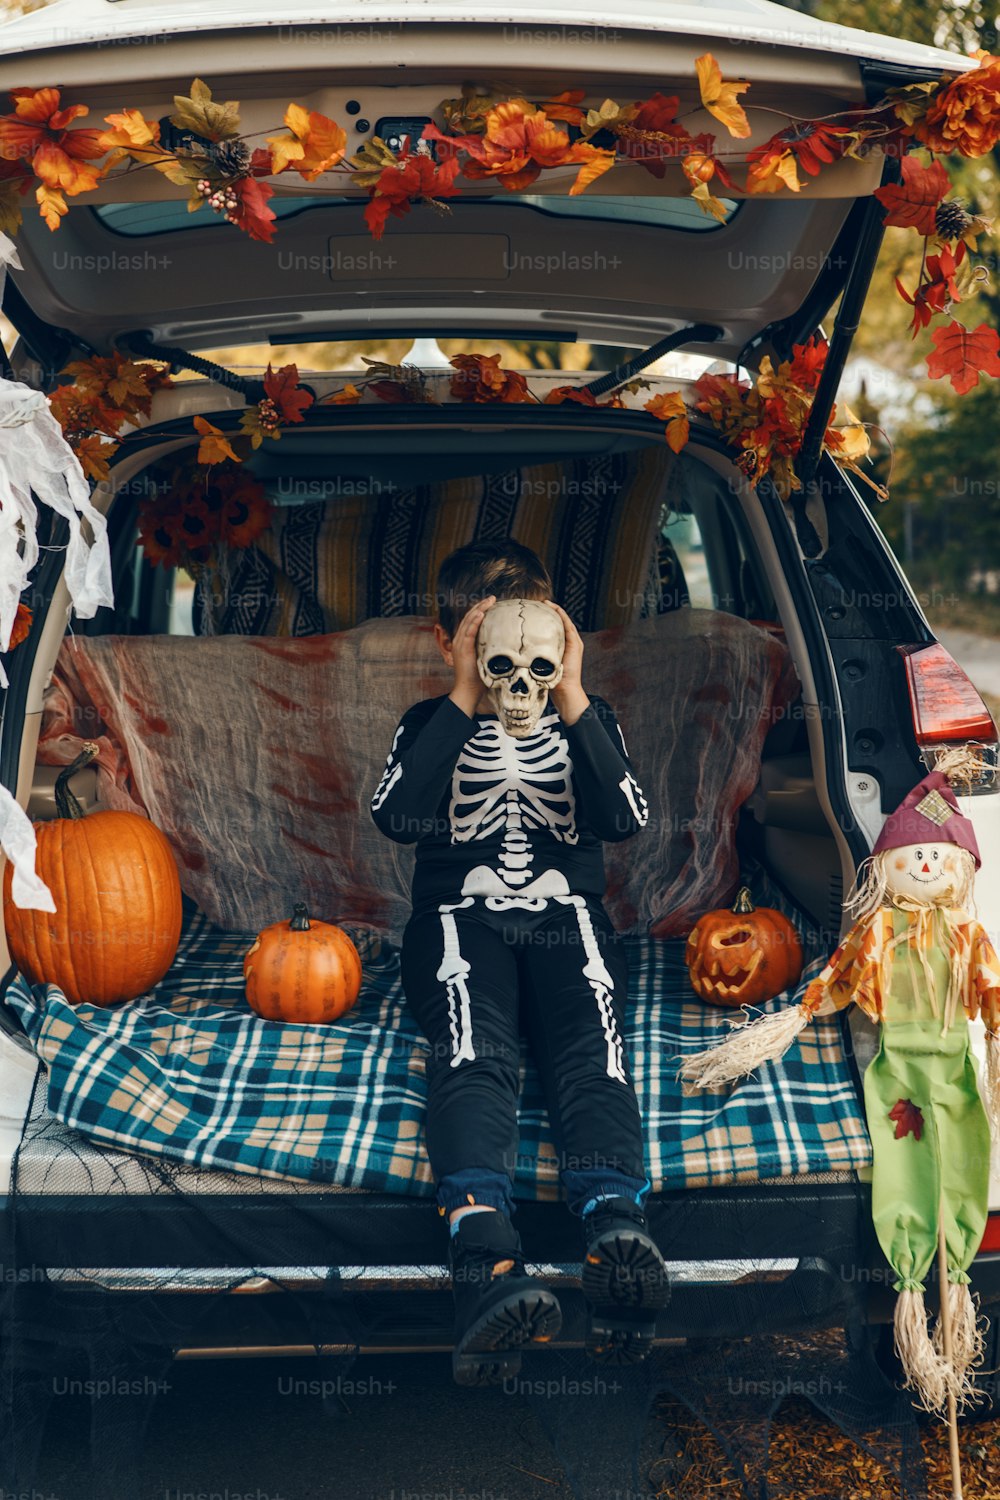 Trick or trunk. Boy child with human skull celebrating Halloween in decorated trunk of car. Happy kid preparing for October holiday outdoor. Social distance and safe alternative celebration.